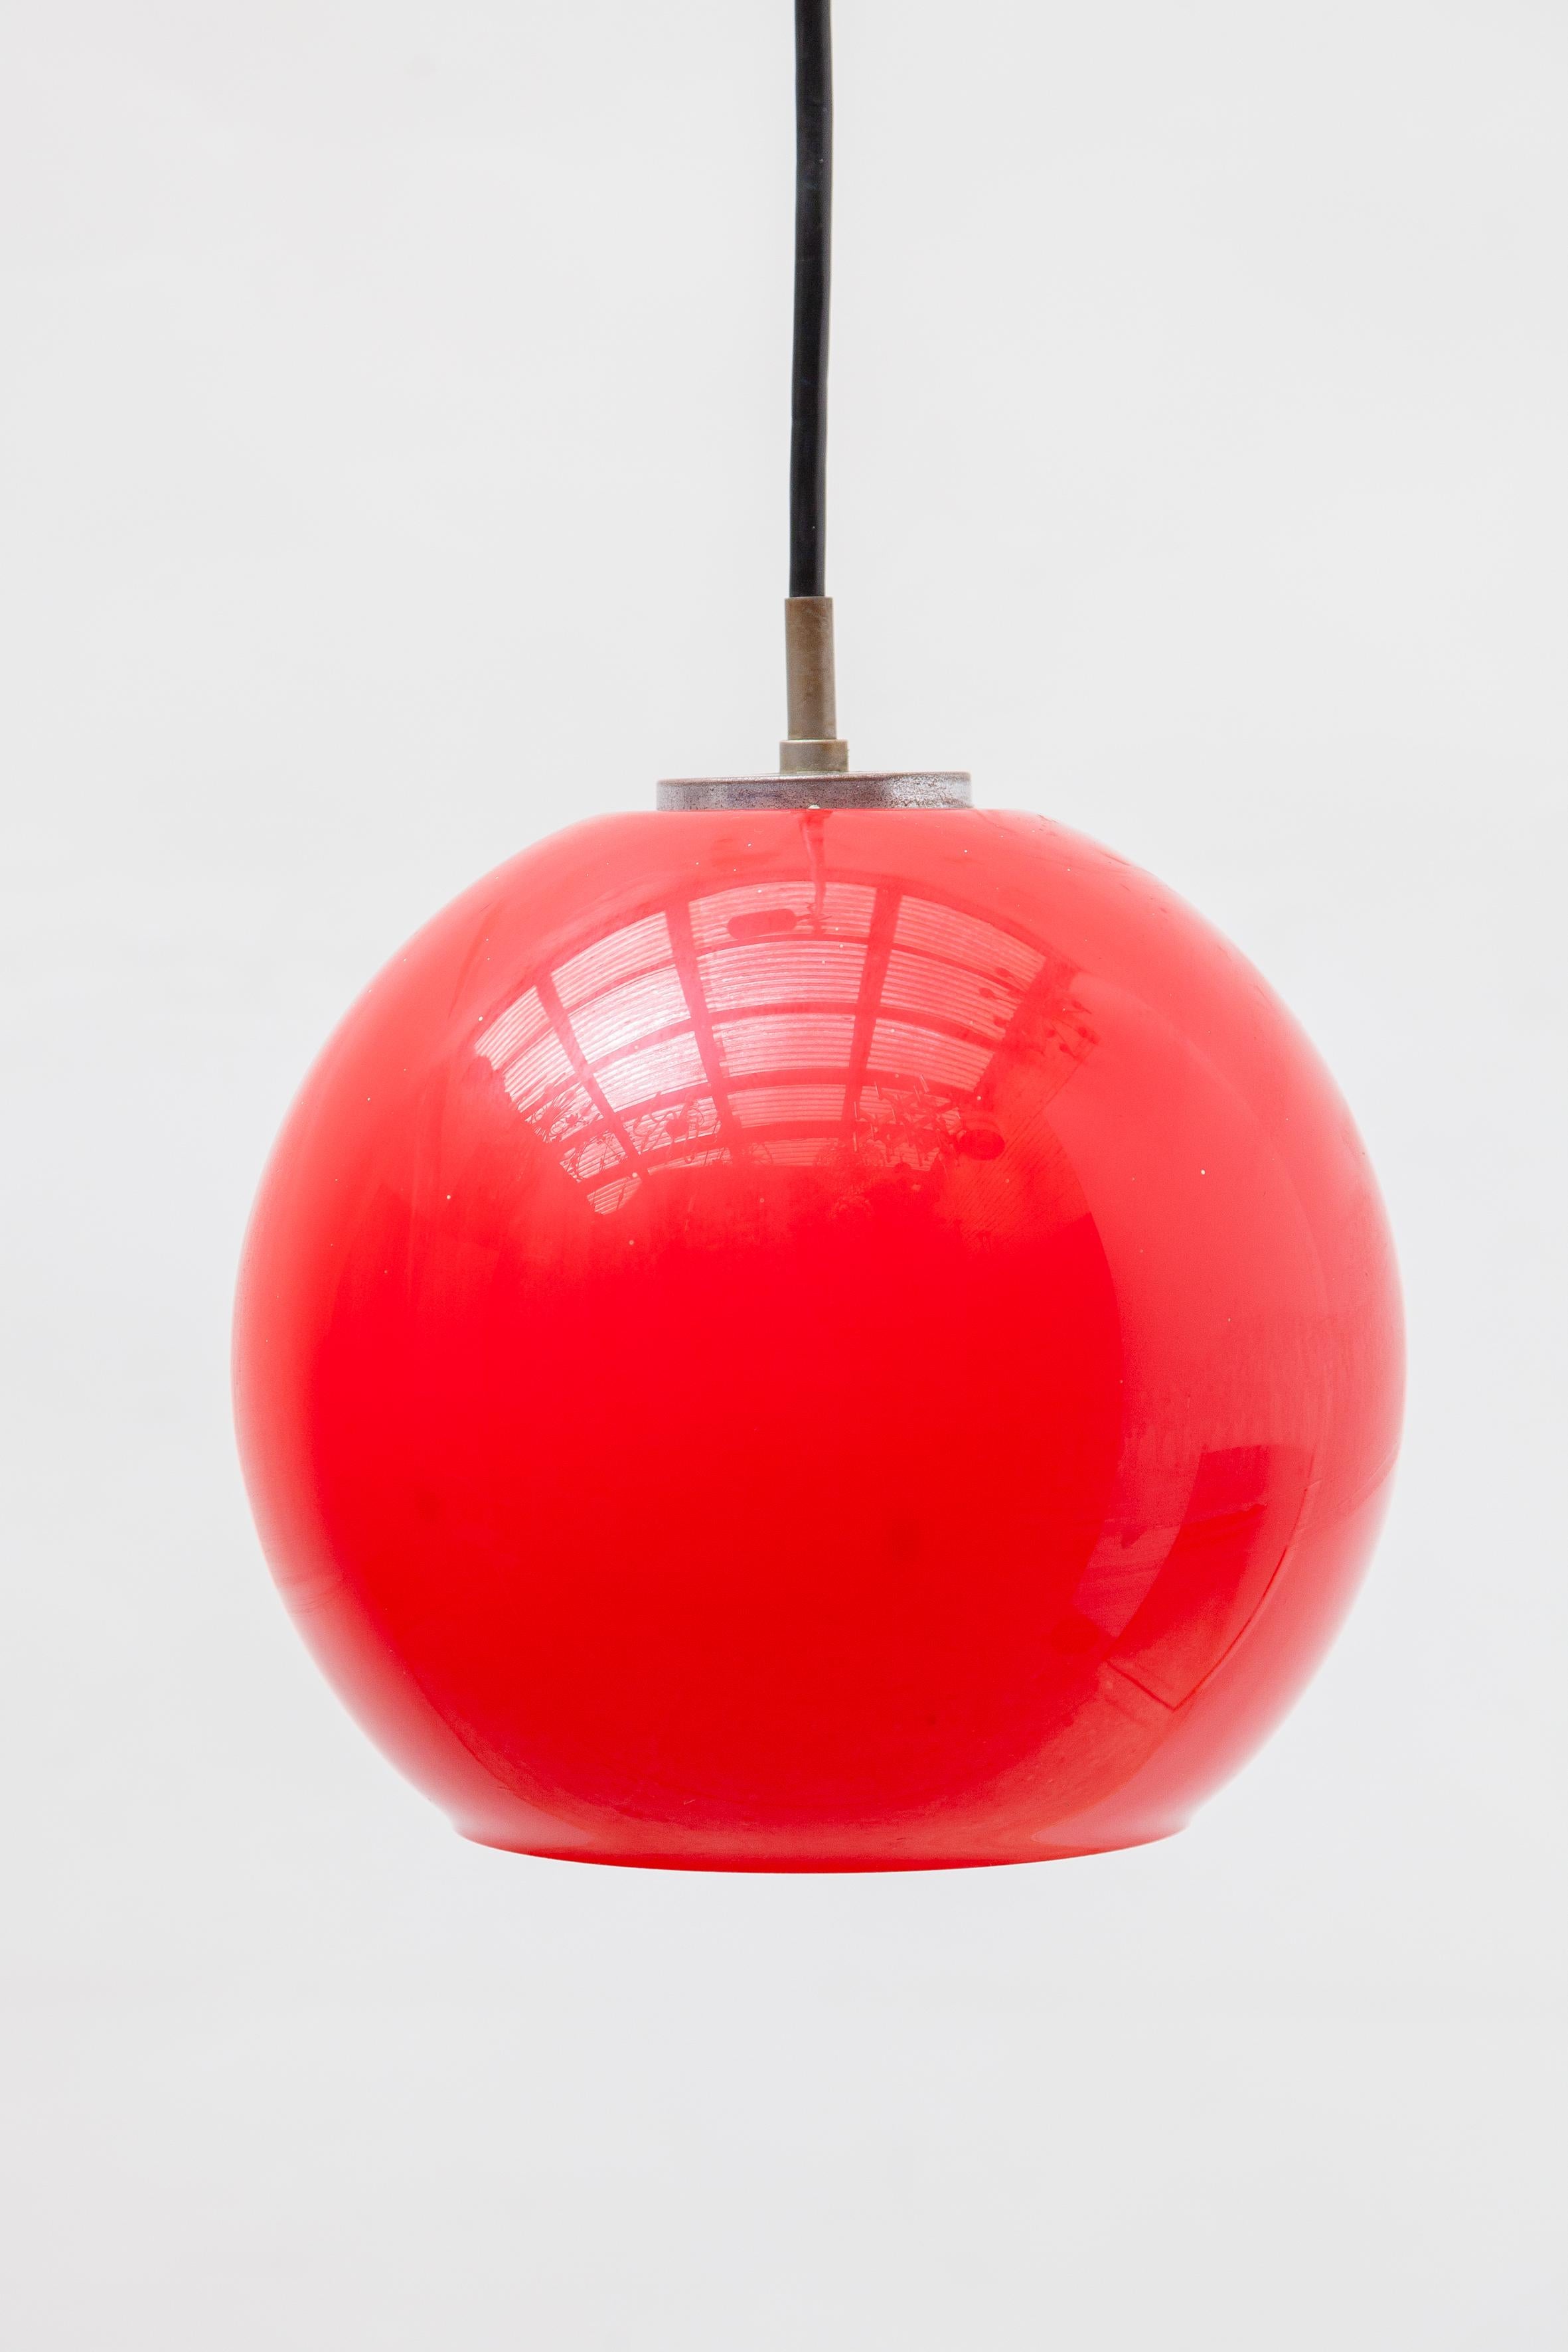 A modern deep red opal glass pendant designed by Koch and Lowy for Peill and Putzler, manufactured in Germany, circa 1950s.